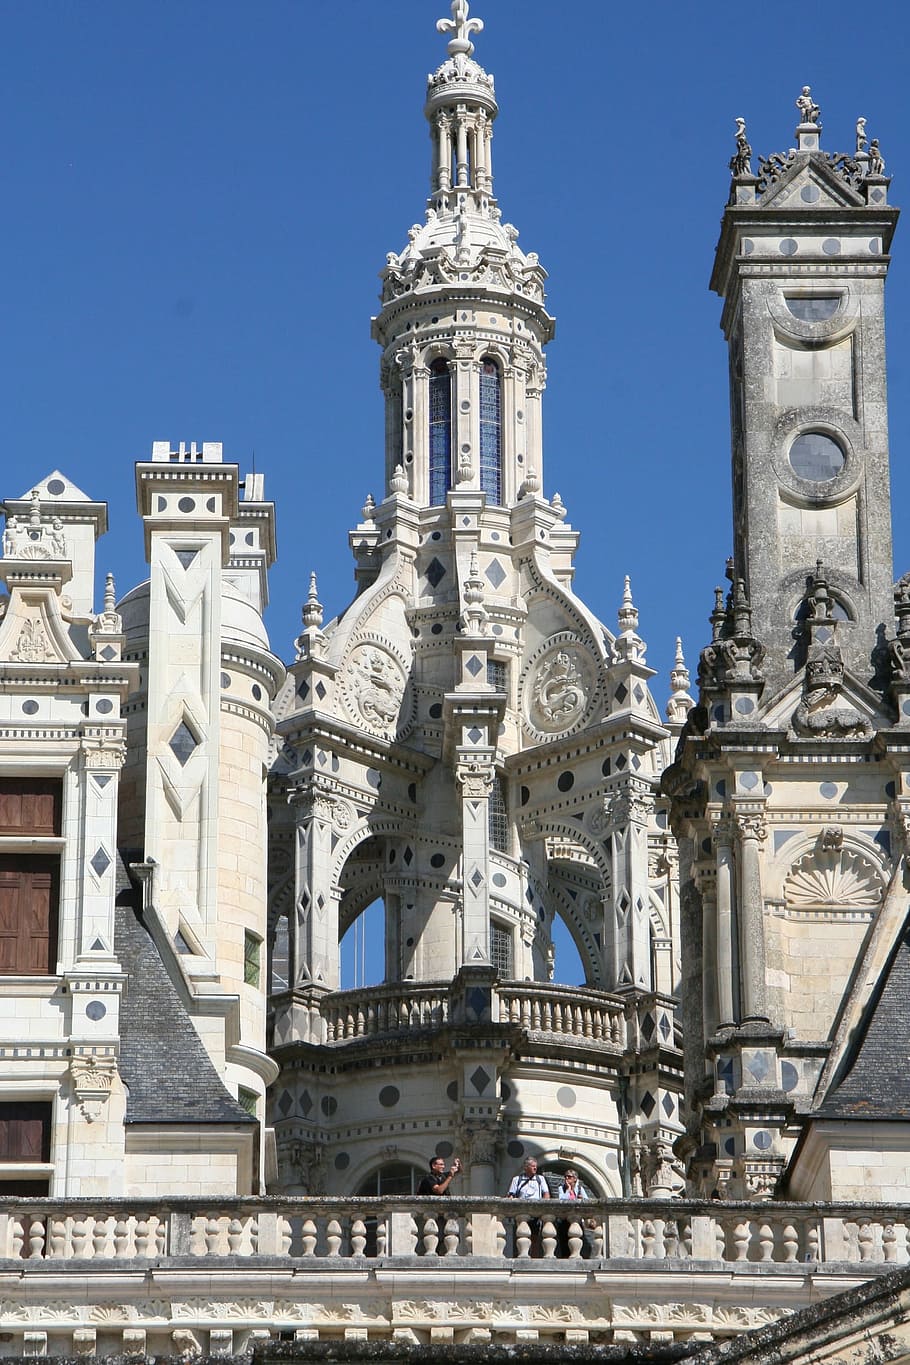 Chambord, Renaissance, Castle, architecture, loire valley, lantern, roofs, history, low angle view, outdoors